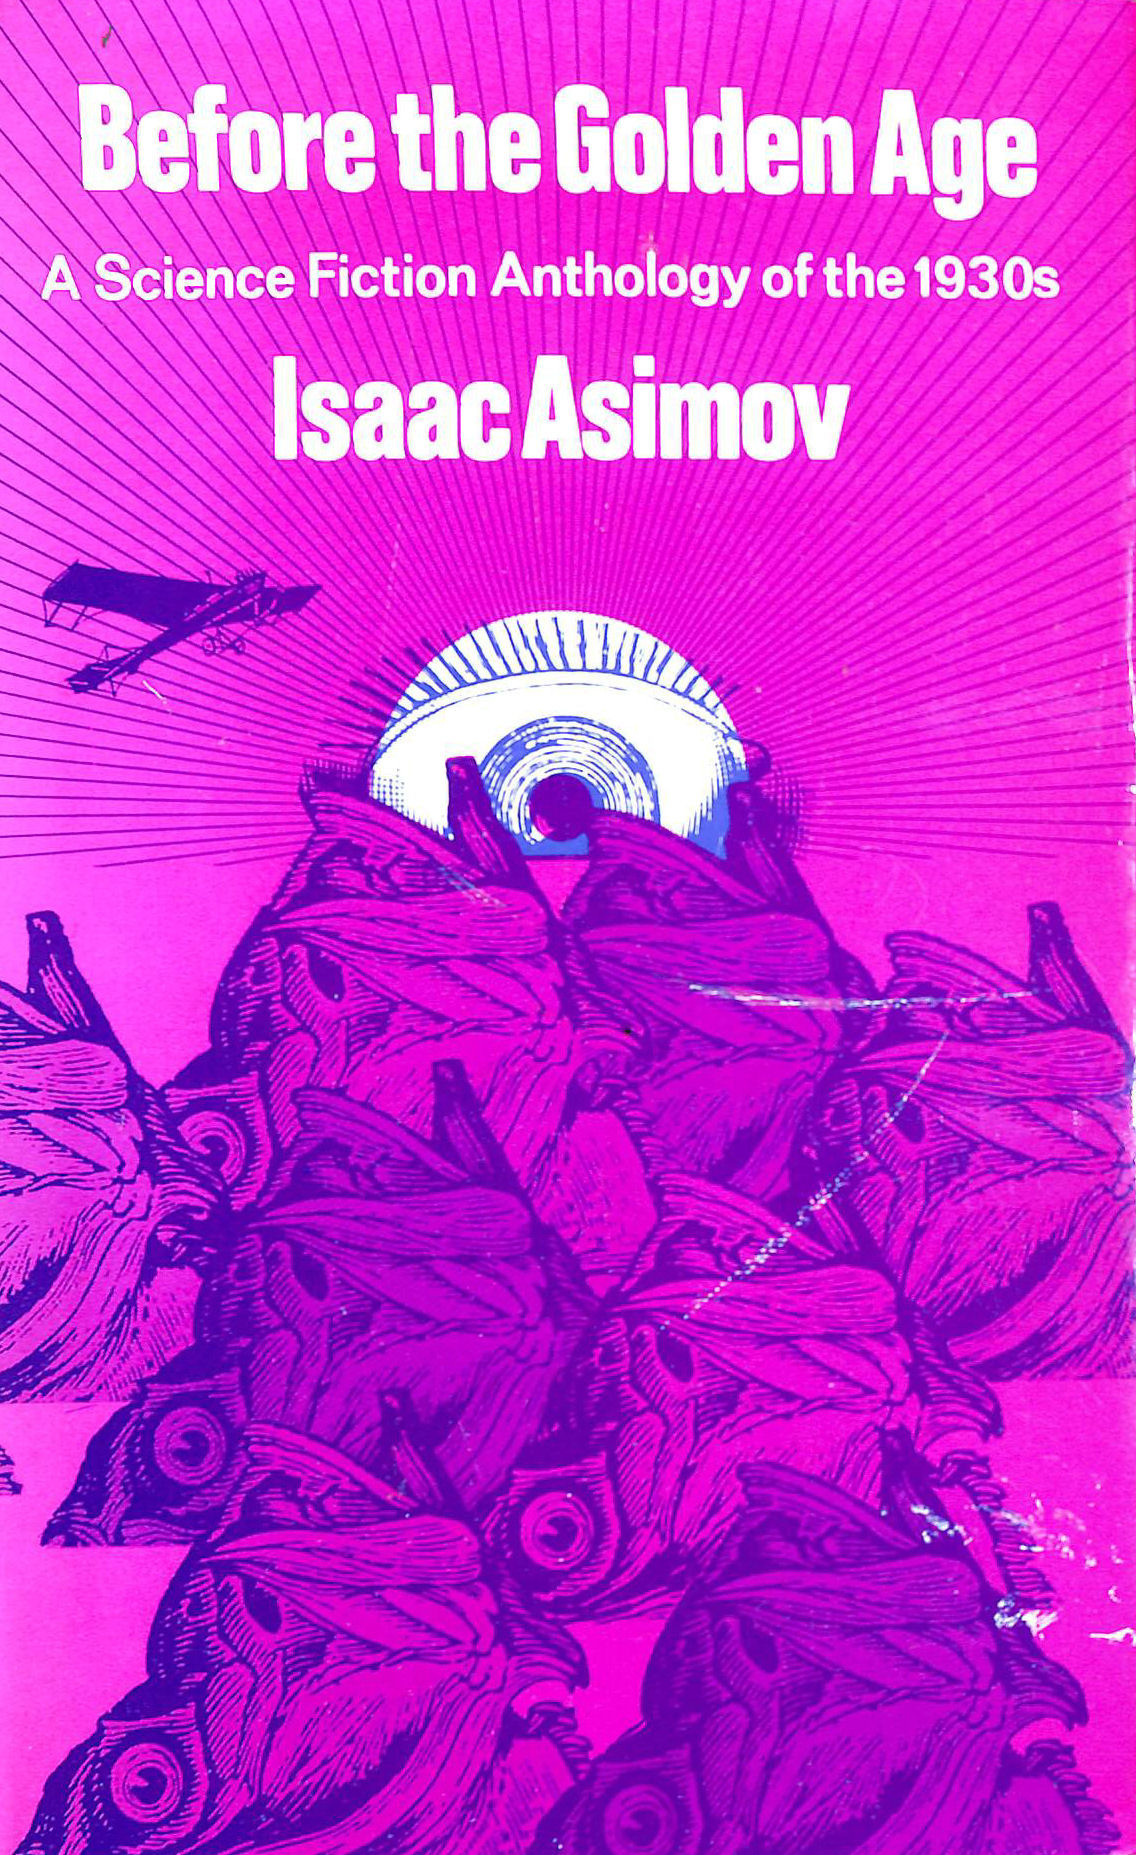 COLLECTED BY ISACC ASIMOV - Before the Golden Age. A Science Fiction Anthology of the 1930s.